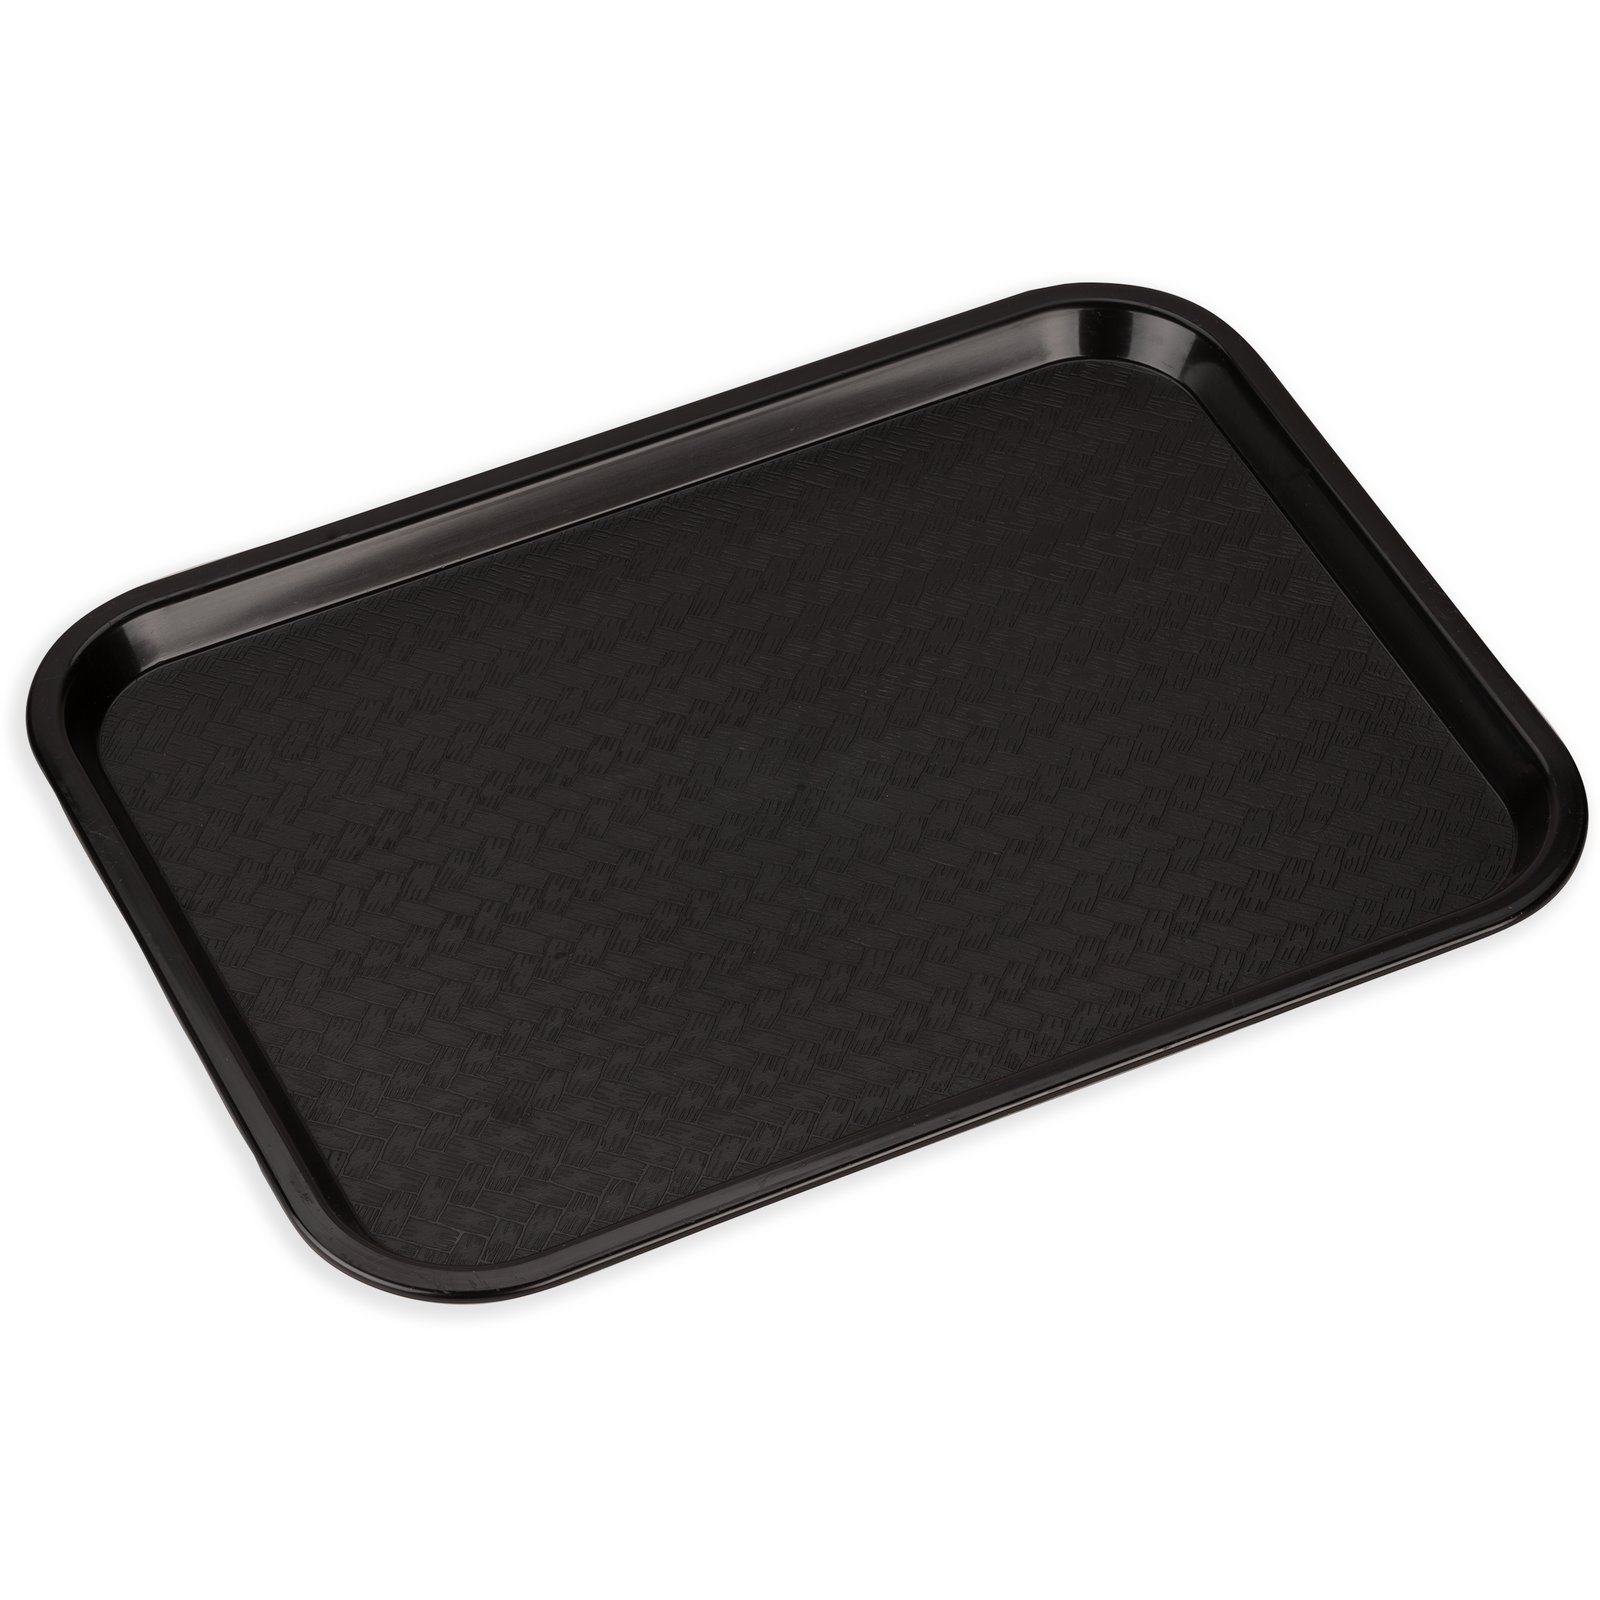 Choice 14 x 18 Blue Plastic Fast Food Tray - 12/Pack